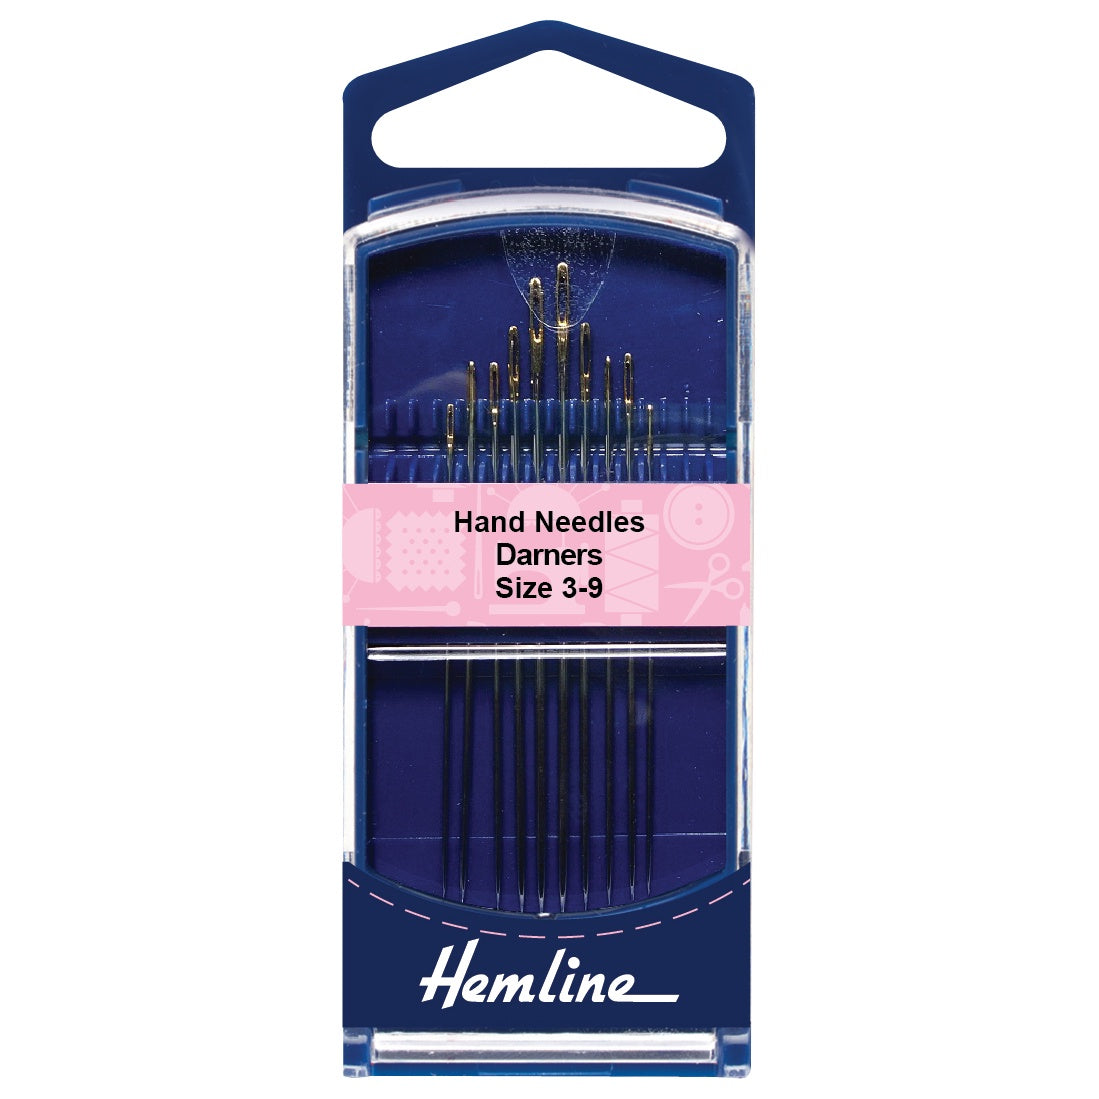 HAND NEEDLES - DARNERS Size 3-9 - 10 Pieces